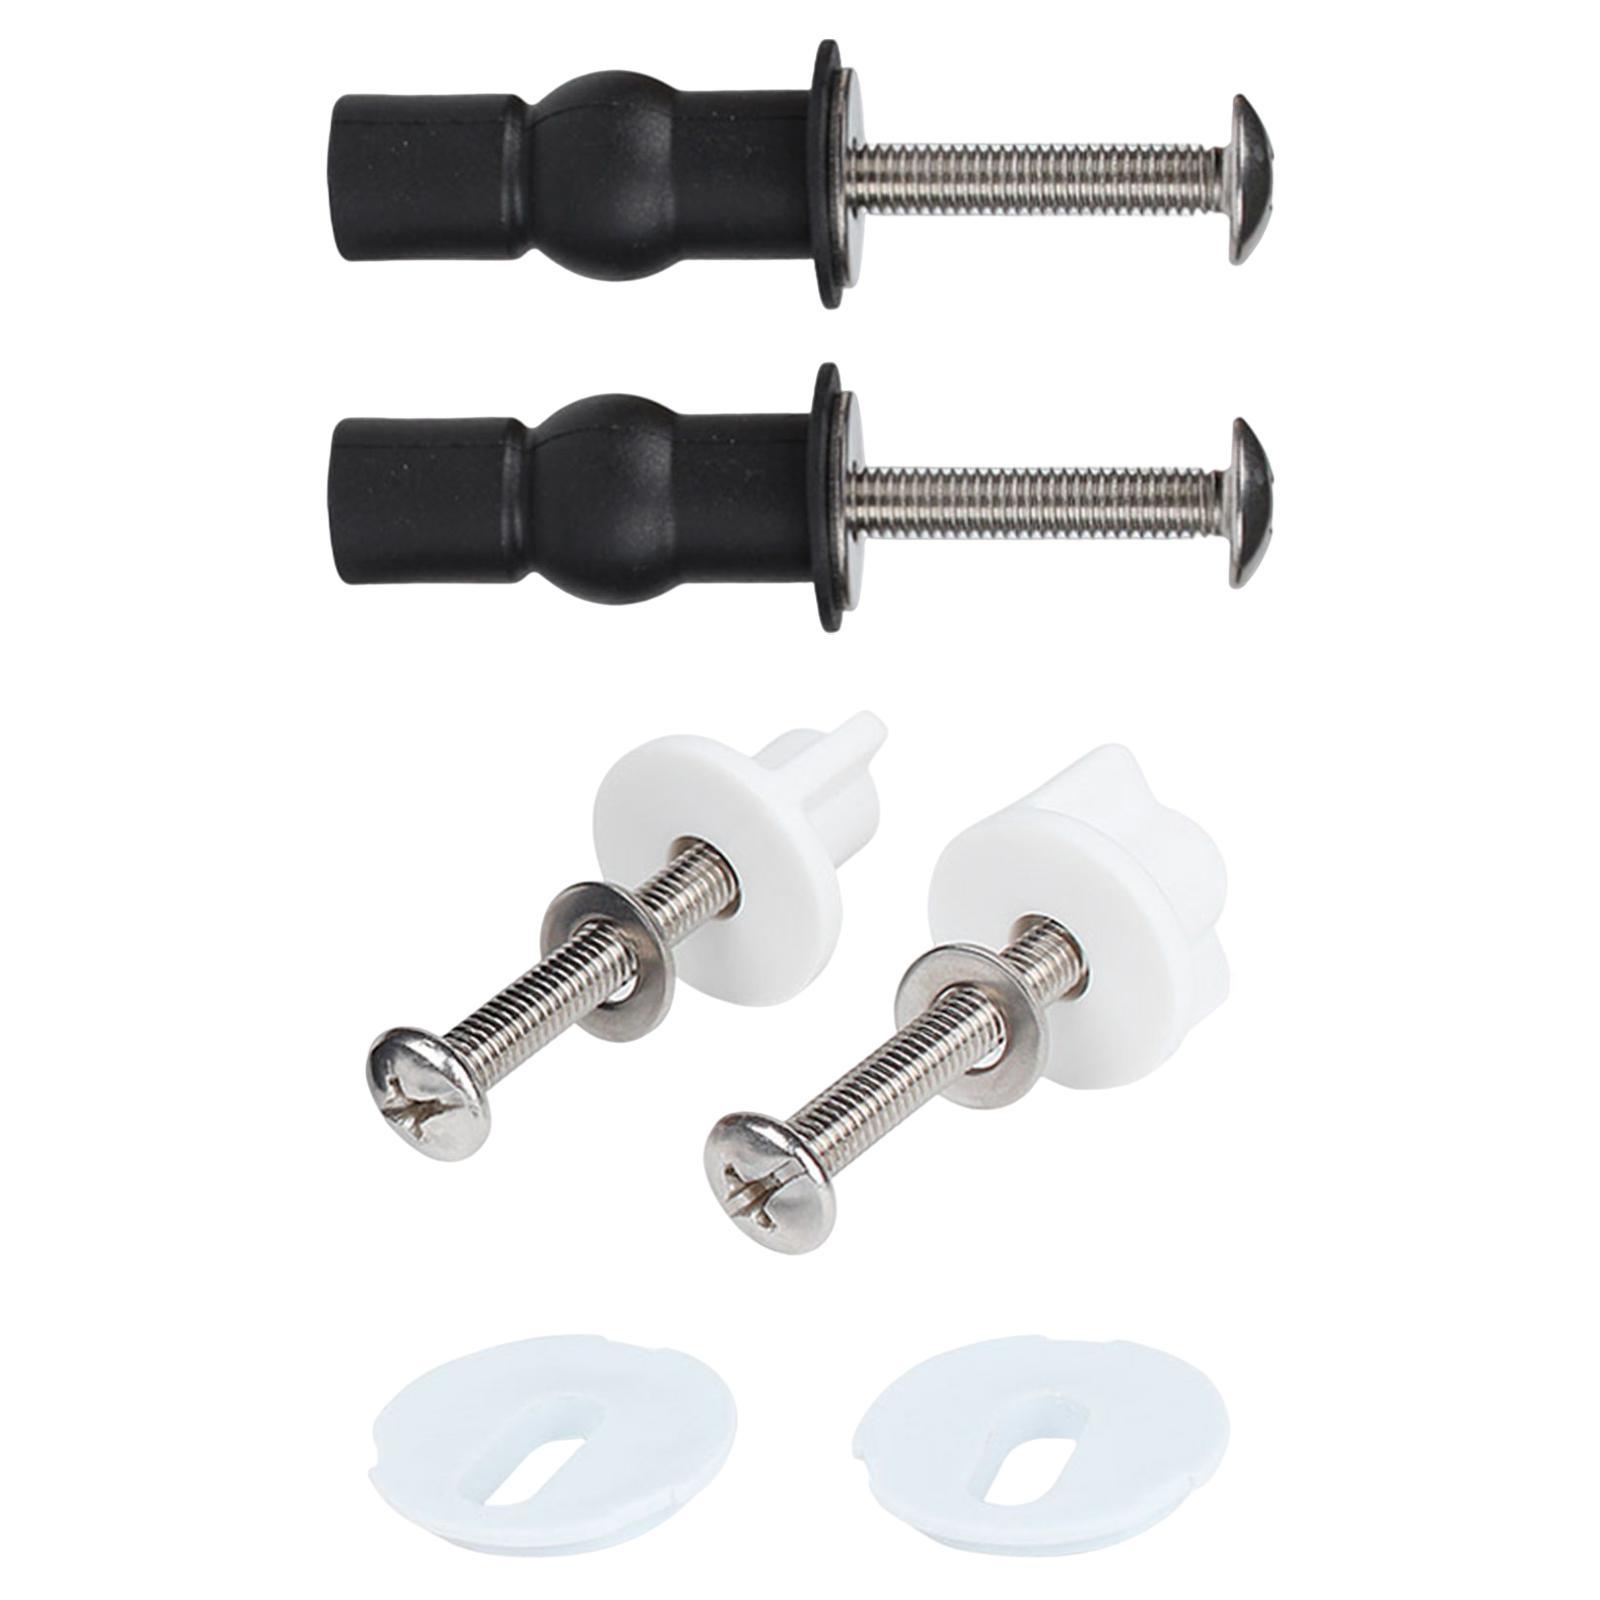 2x Toilet Seat Screws Bolts Fastener Replacement Toilet Hardware Replacement